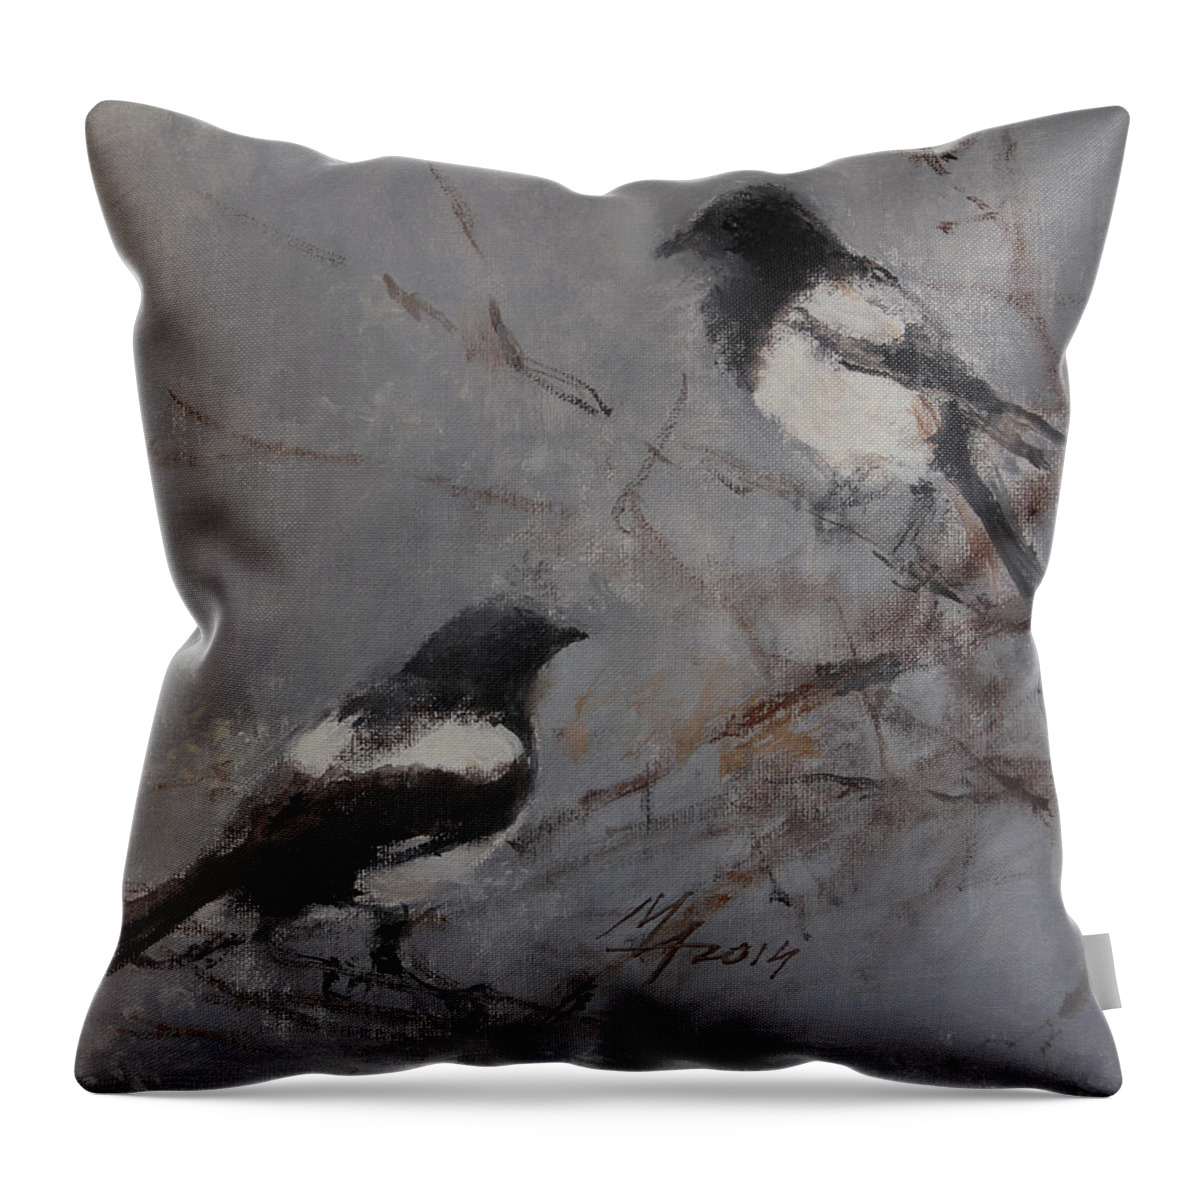 Magpie Throw Pillow featuring the painting Magpies by Attila Meszlenyi